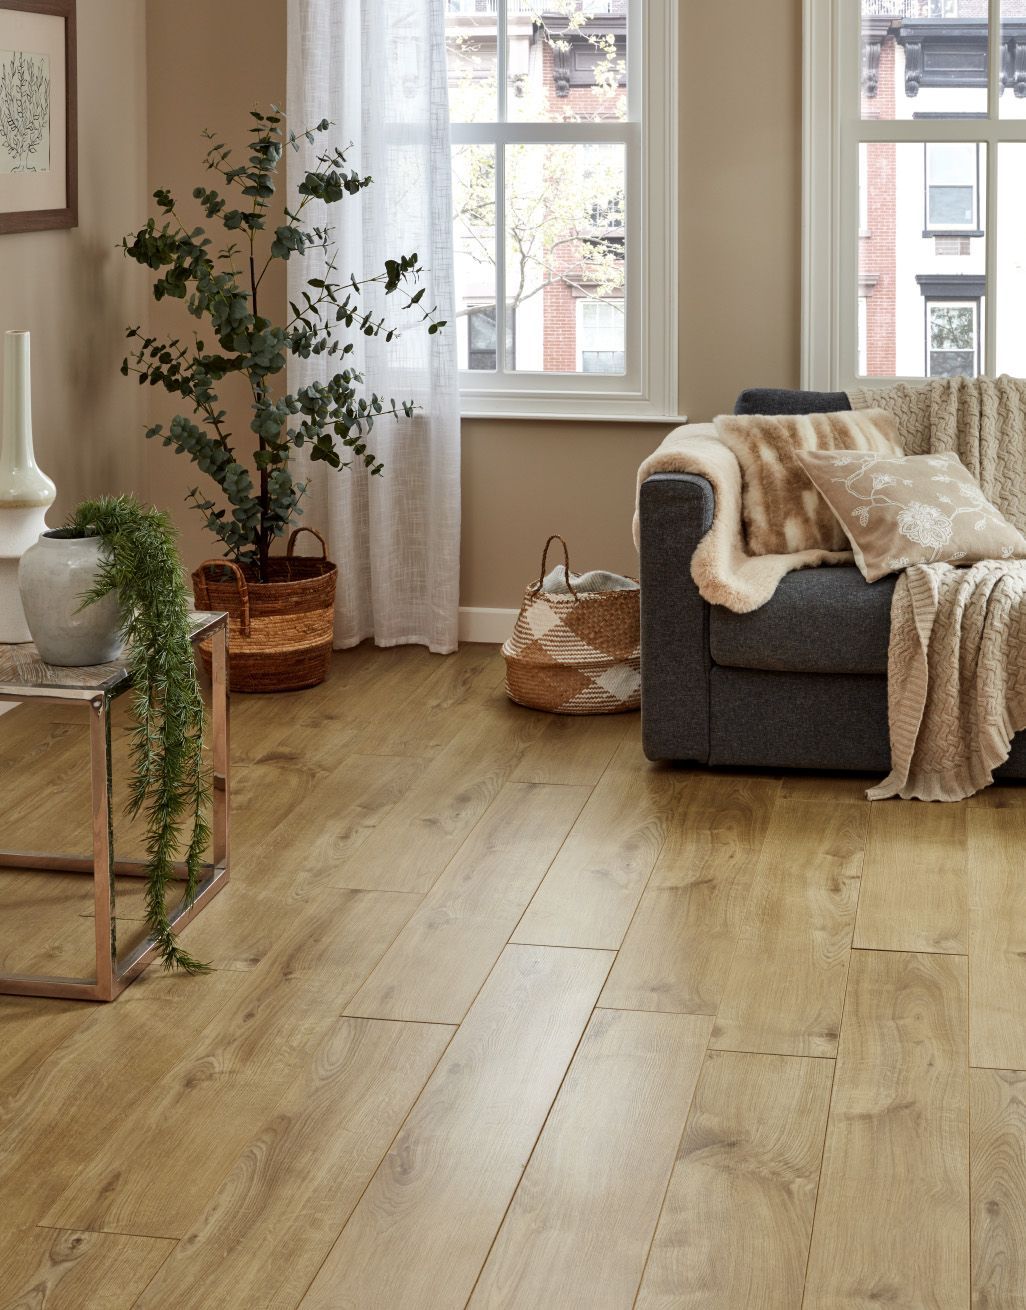 The beauty of the wood laminate flooring